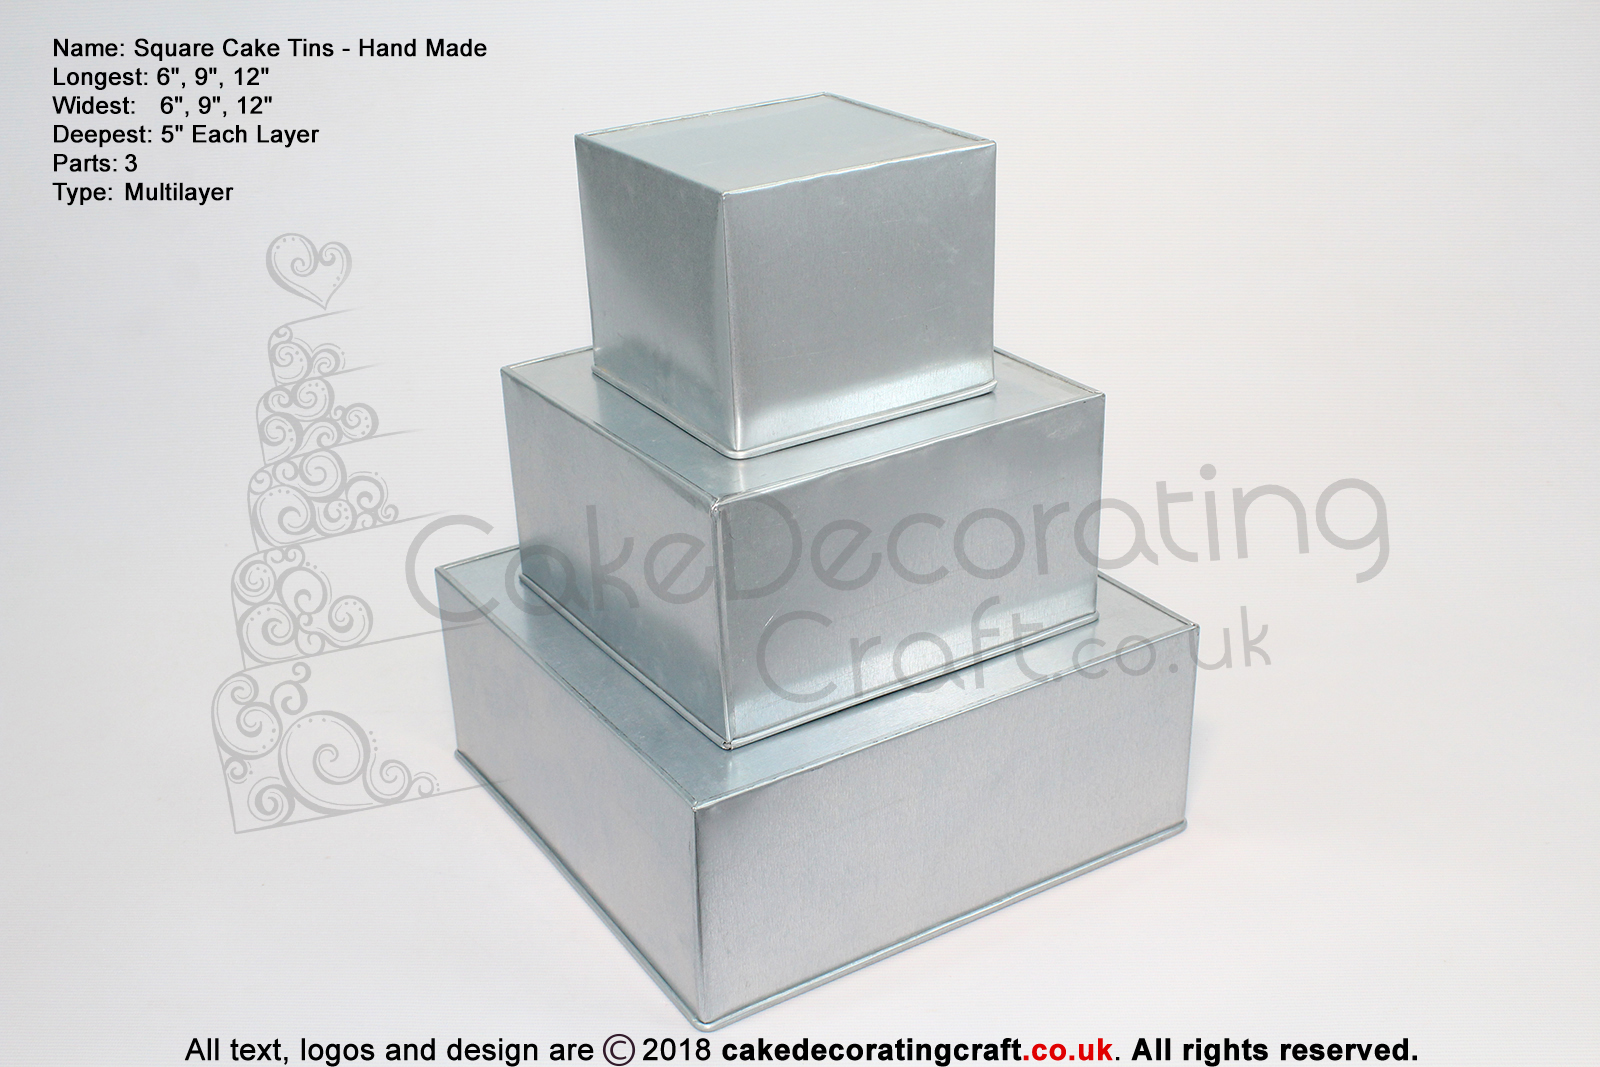 Square Cake Baking Tin | 5" Deep | Size 6 9 12 " | 3 Tiers | Hand Made